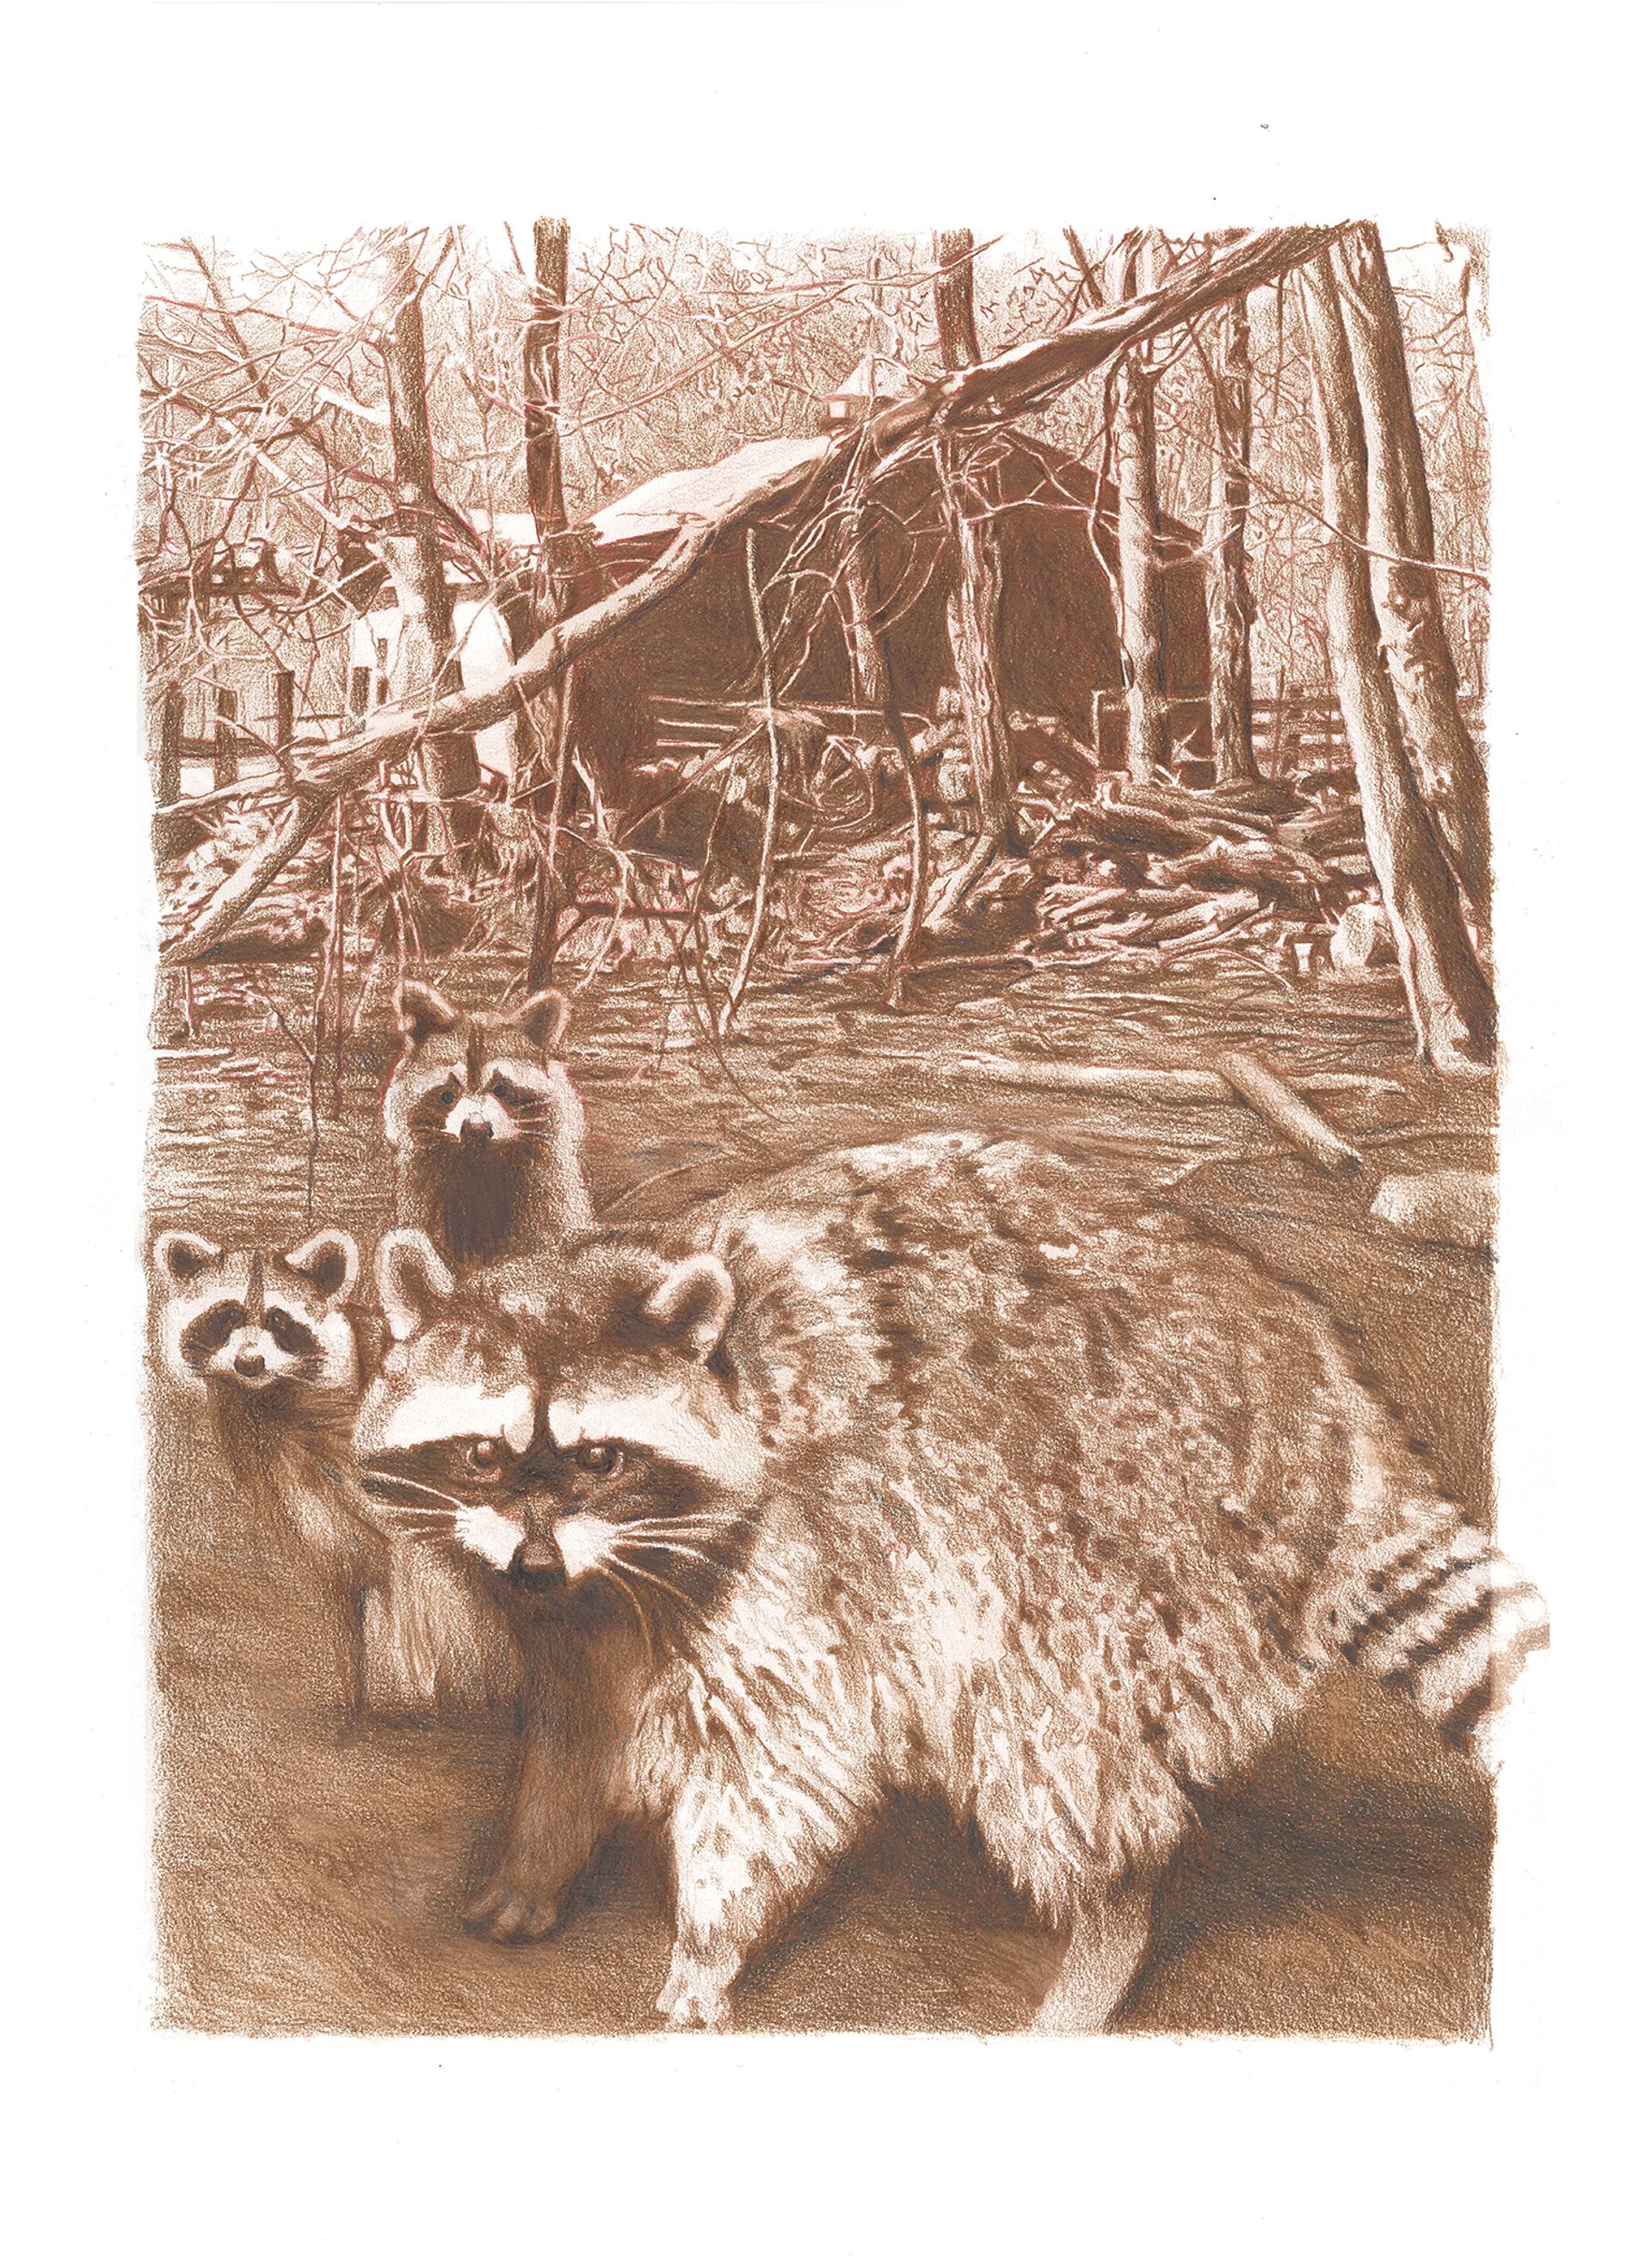 Coon Family by Mary Snowden